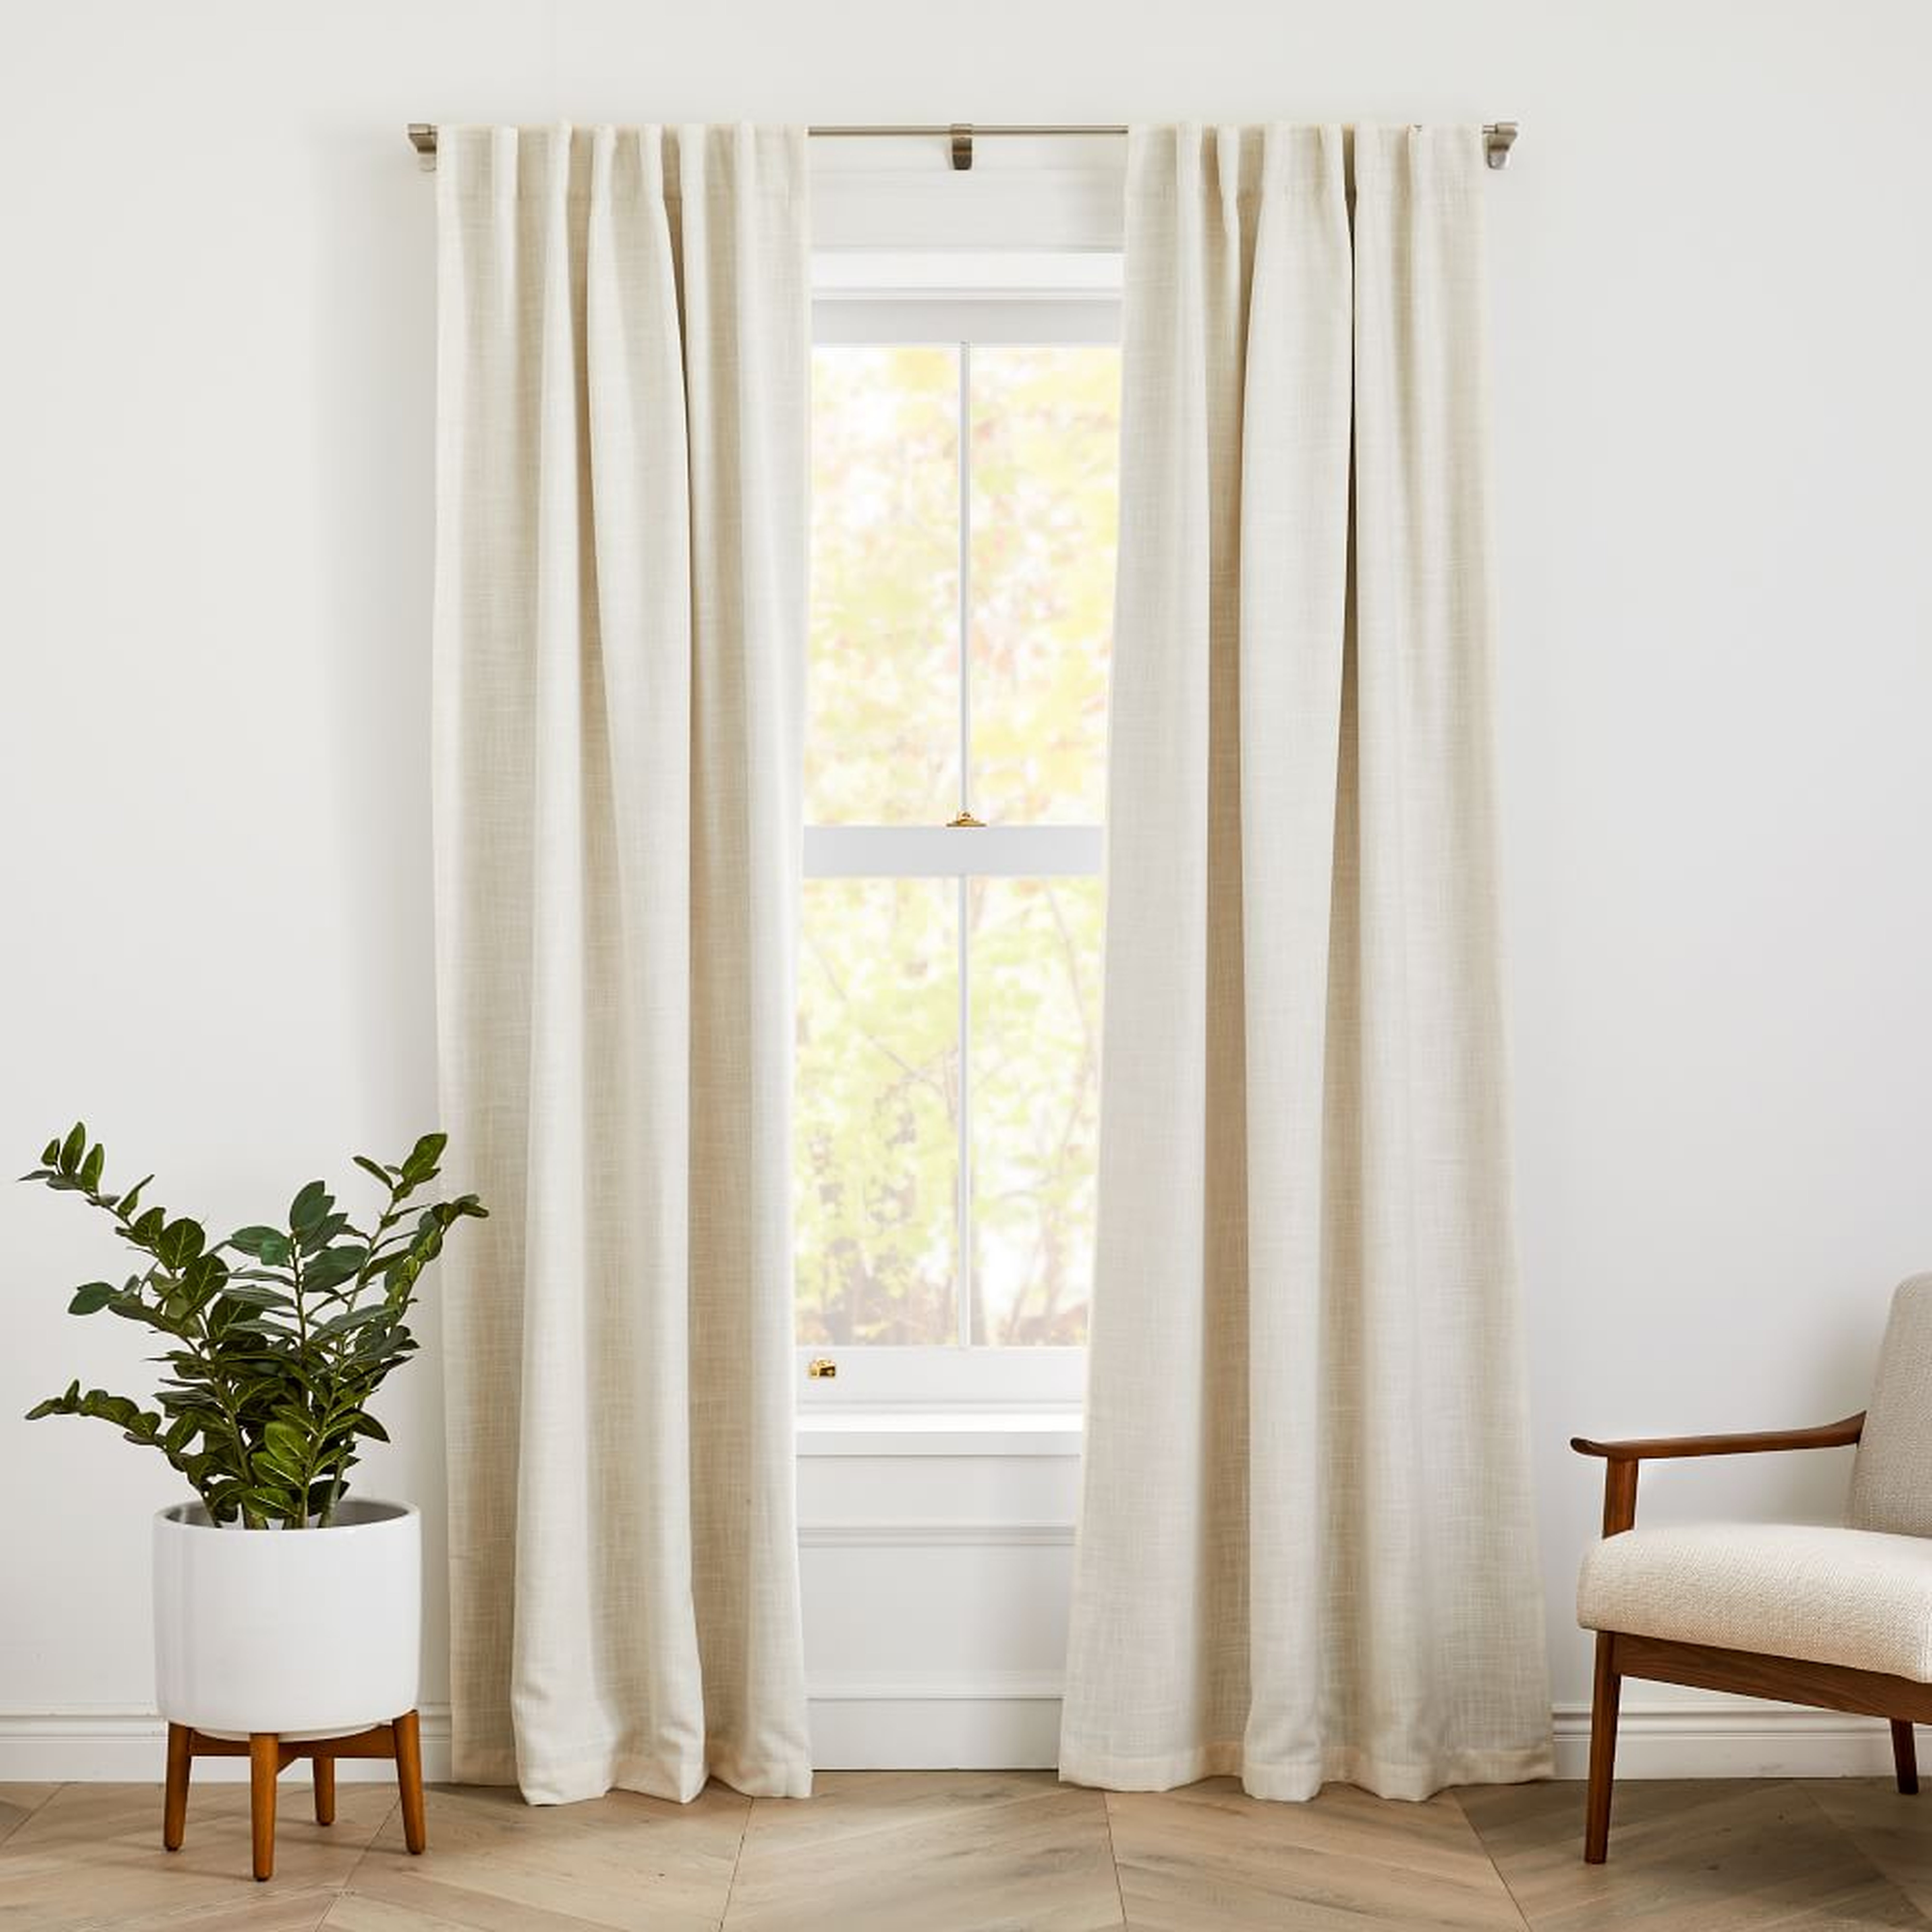 Crossweave Curtain with Black Out Natural Canvas, 48" x 108" - West Elm